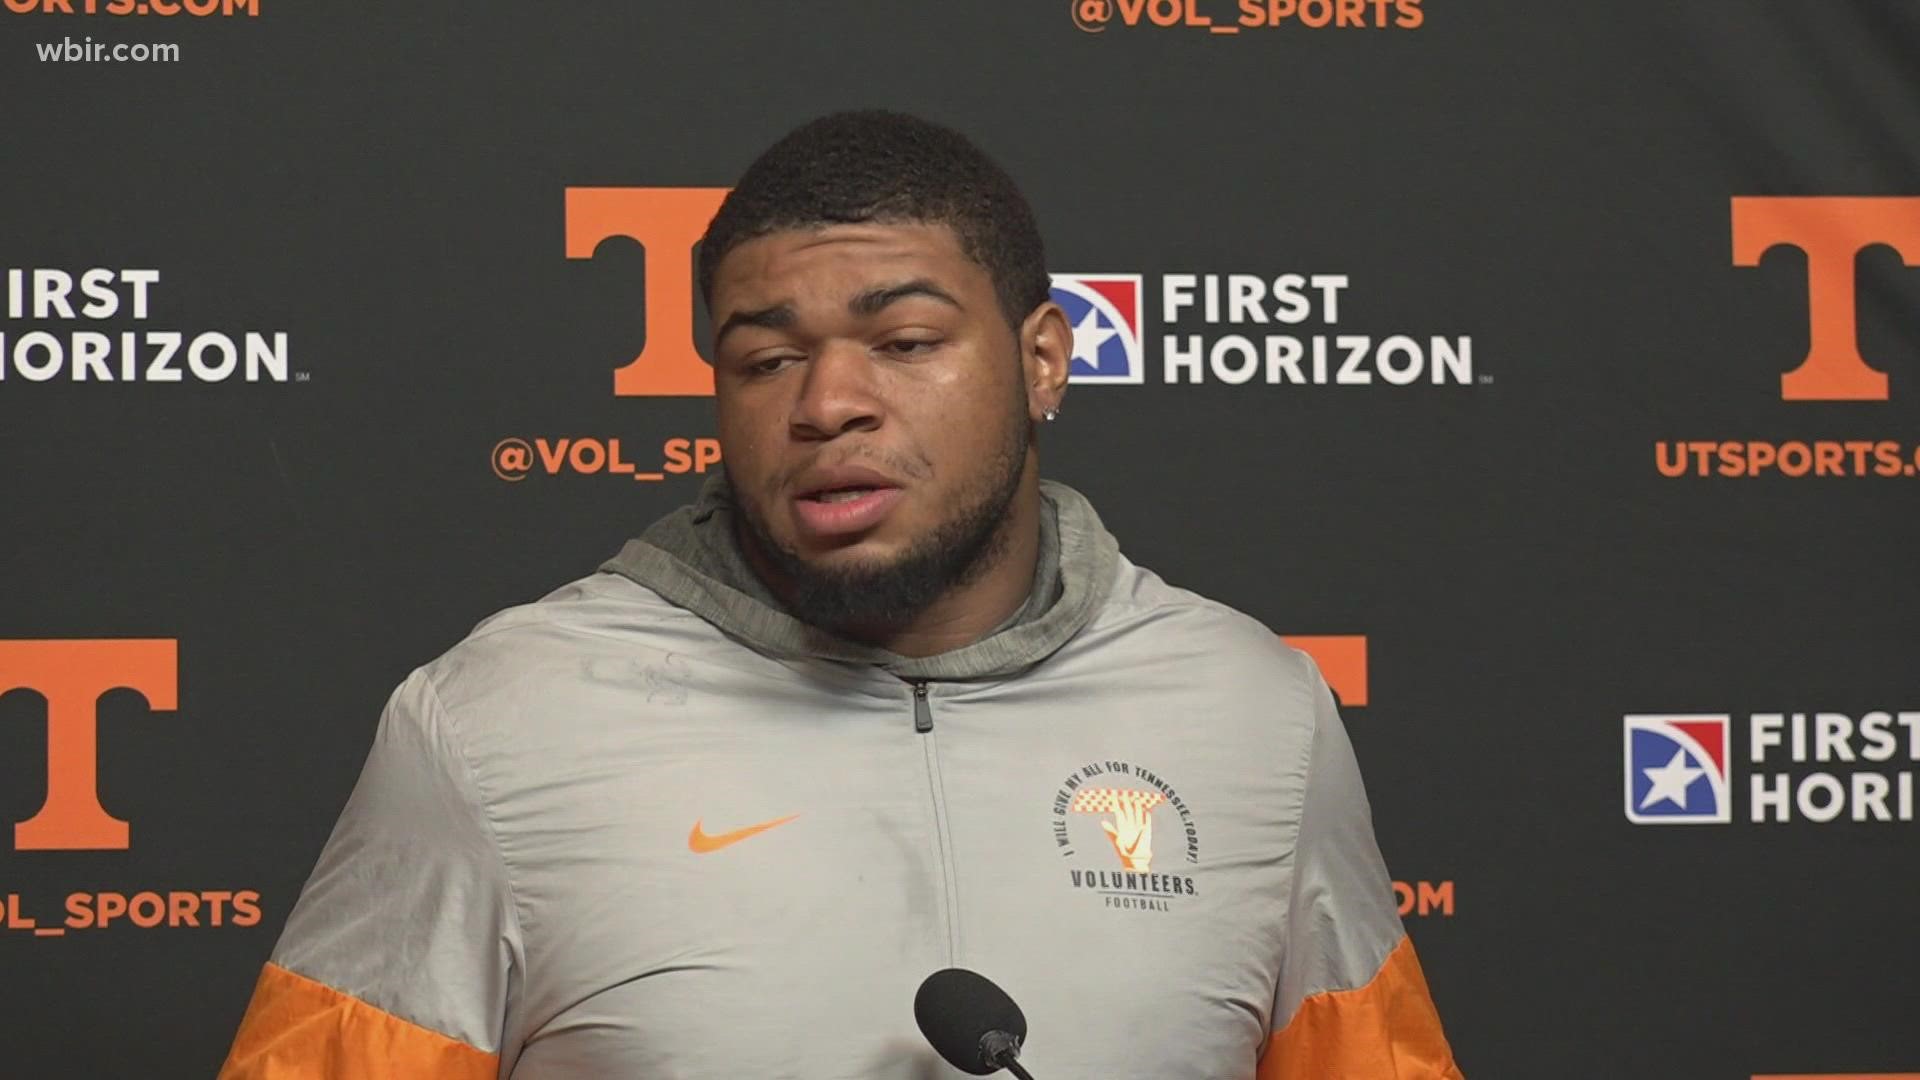 Vols players said they are taking games step by step, as they work to become bowl-eligible this season.